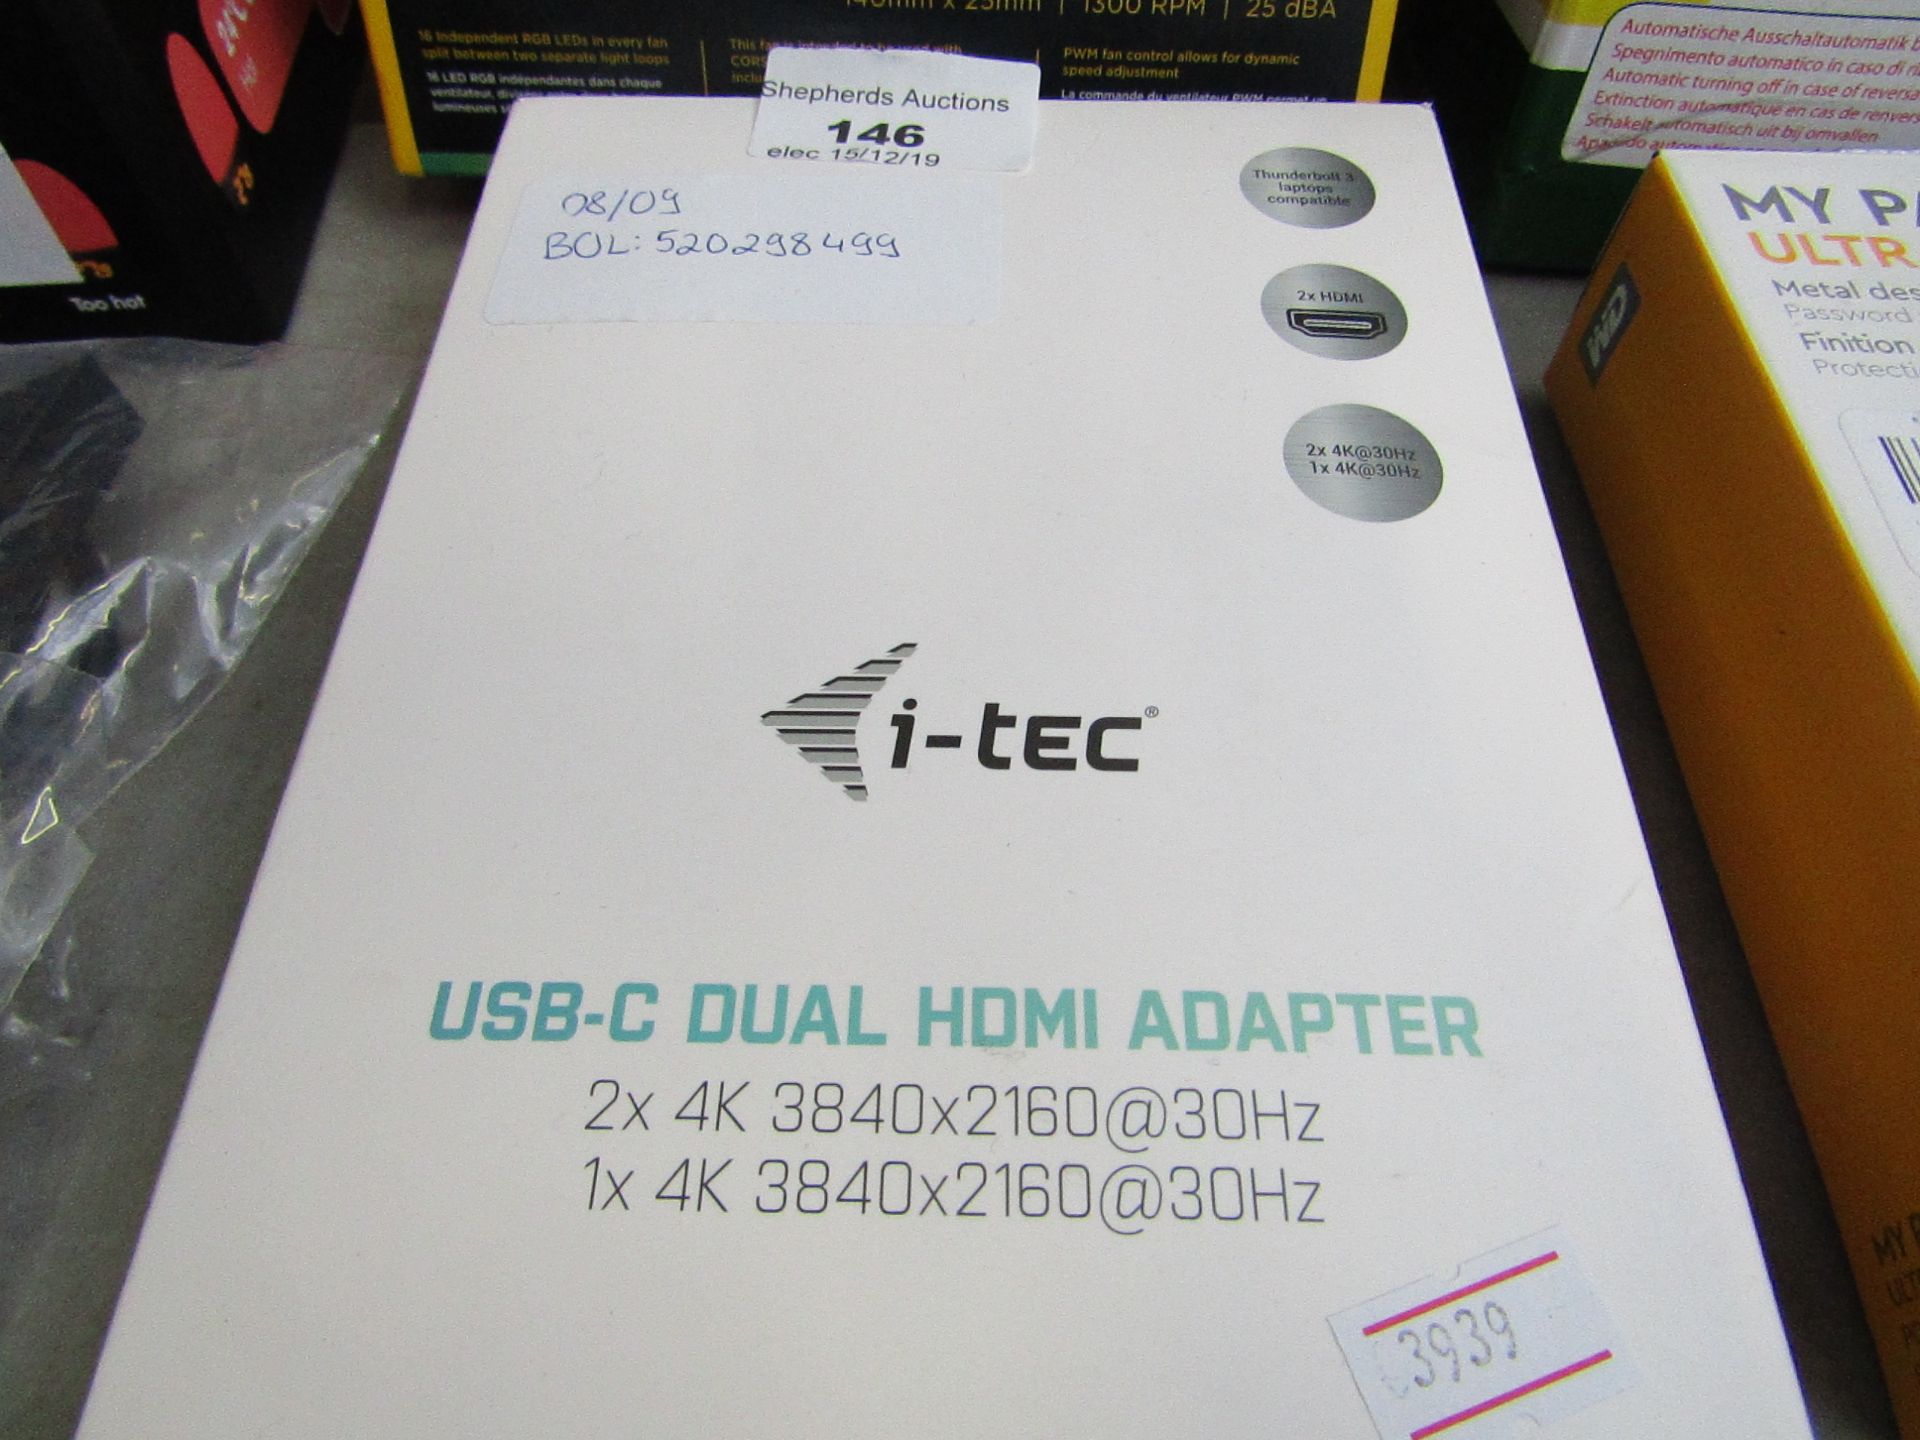 i-tec - USB-C Dual HDMI Adapter, untested and boxed.